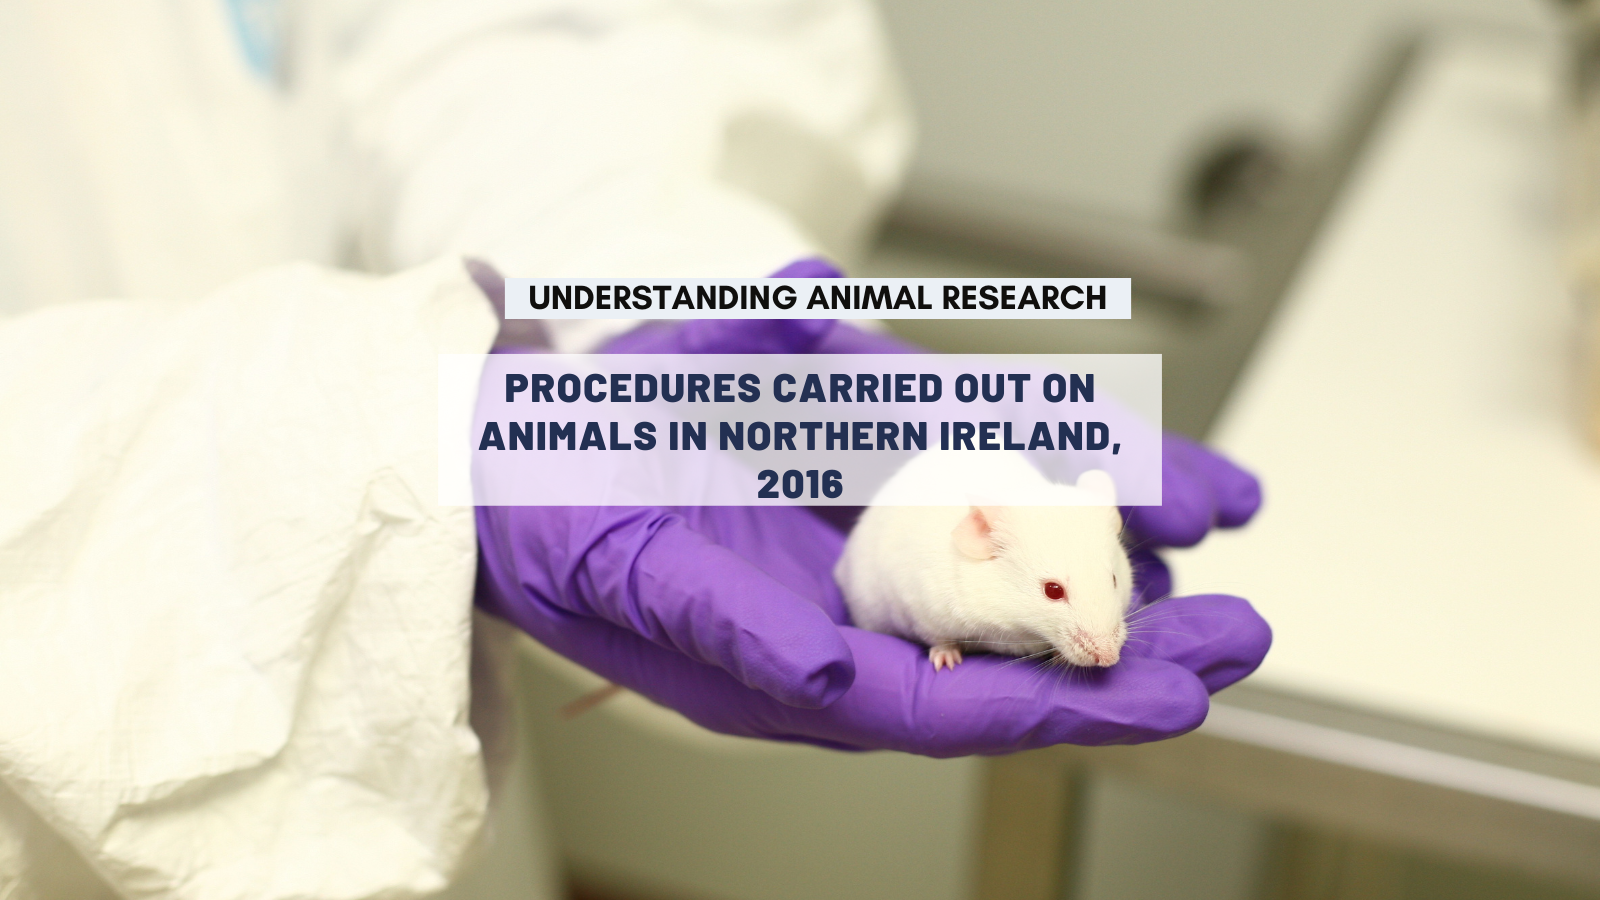 Procedures carried out on animals in Northern Ireland, 2016